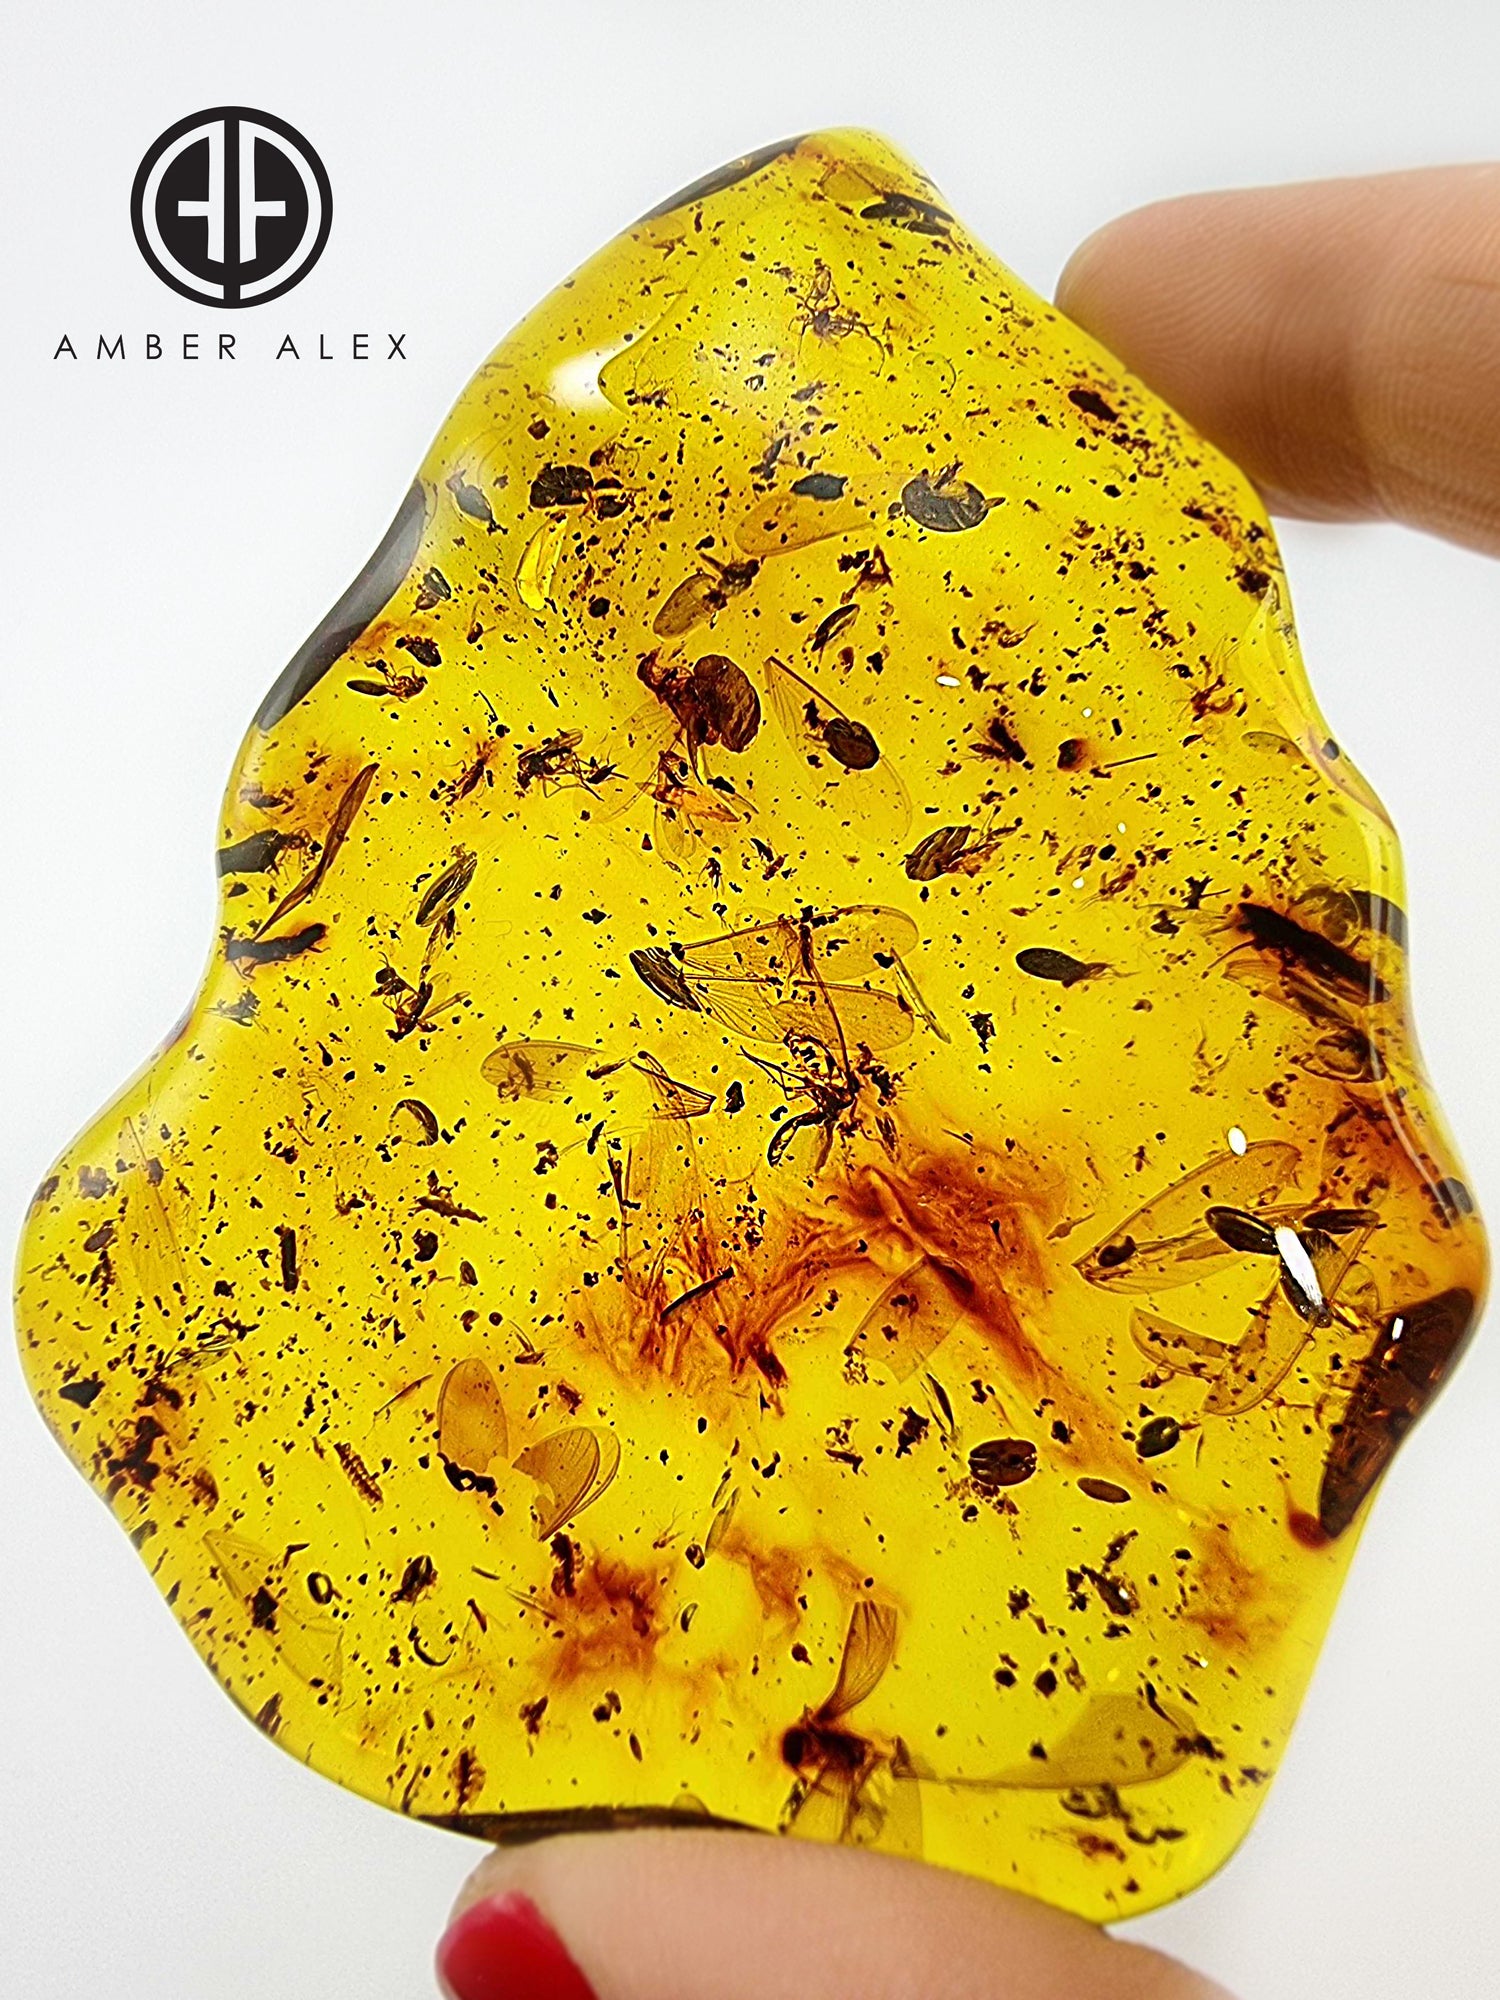 Natural Amber Wave Shape Stone With Insects